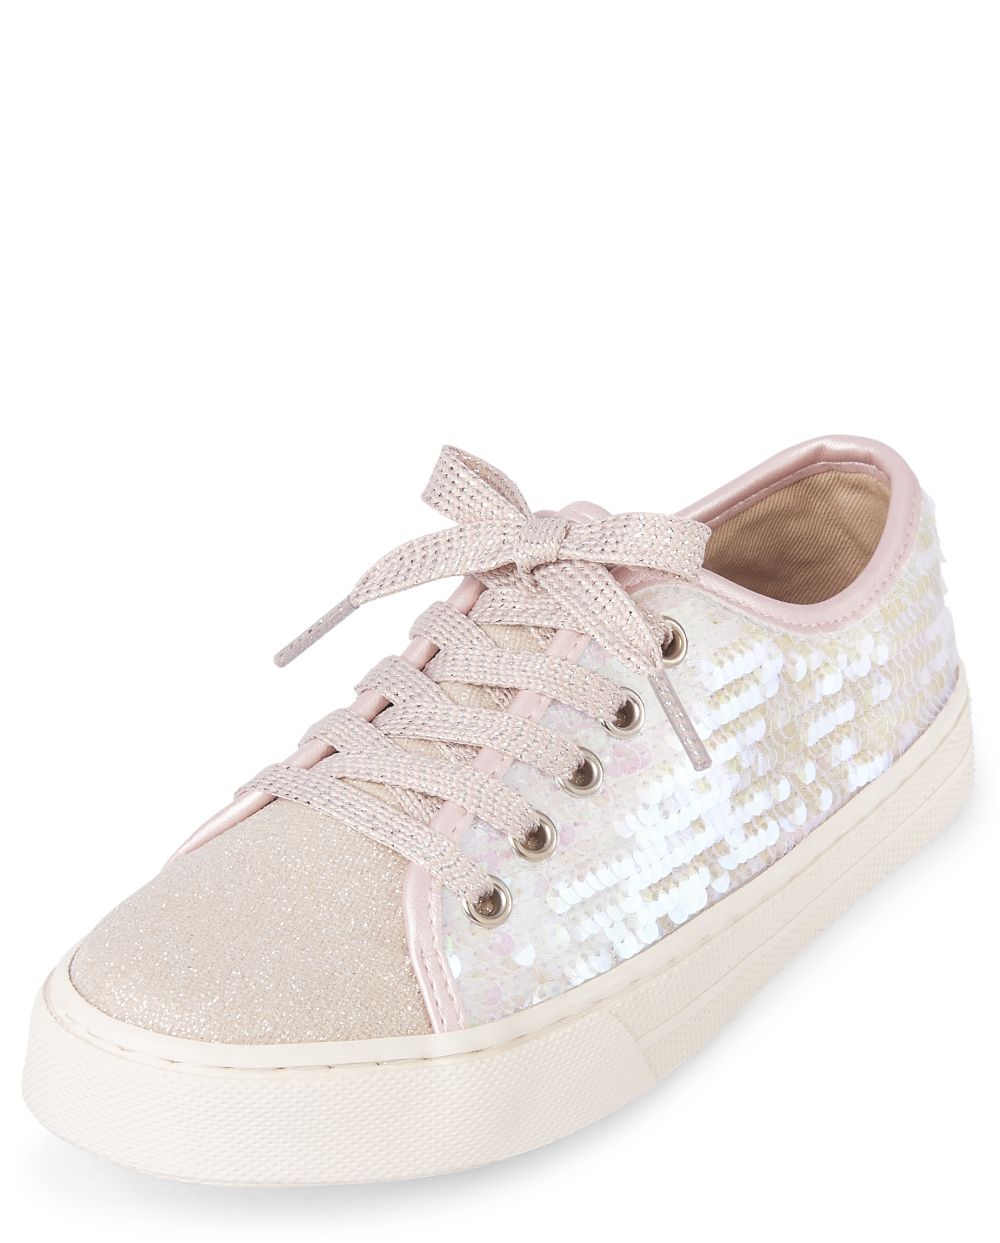 Girls Sequin And Glitter Faux Leather Low Top Sneakers